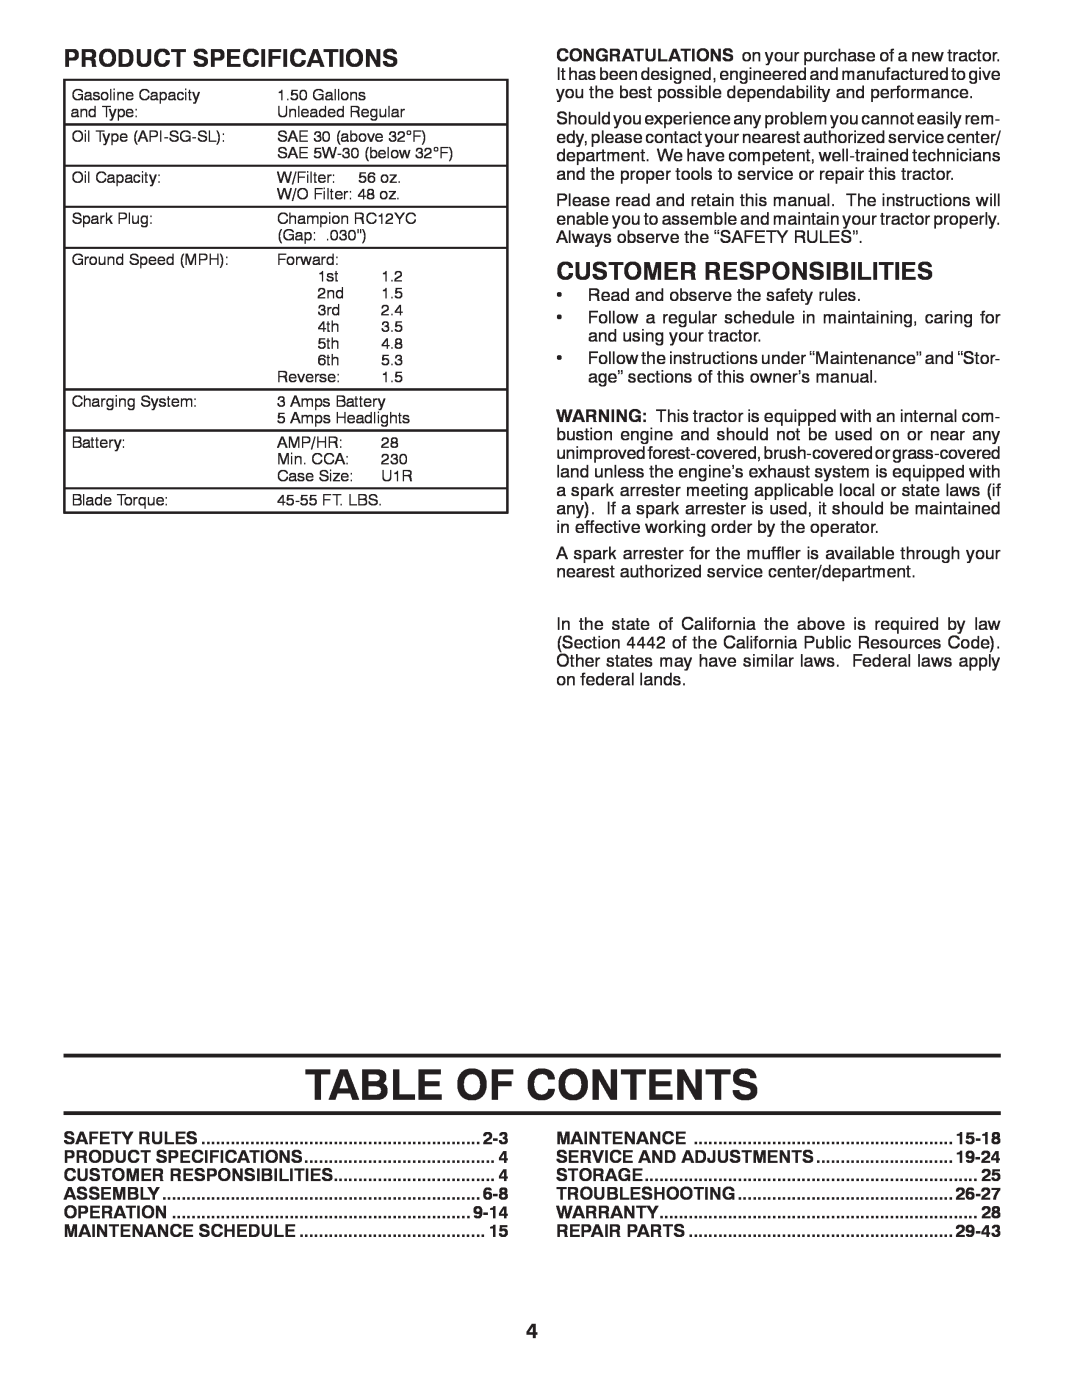 Poulan pb19546lt Table Of Contents, Product Specifications, Customer Responsibilities, 9-14, 15-18, 19-24, 26-27, 29-43 